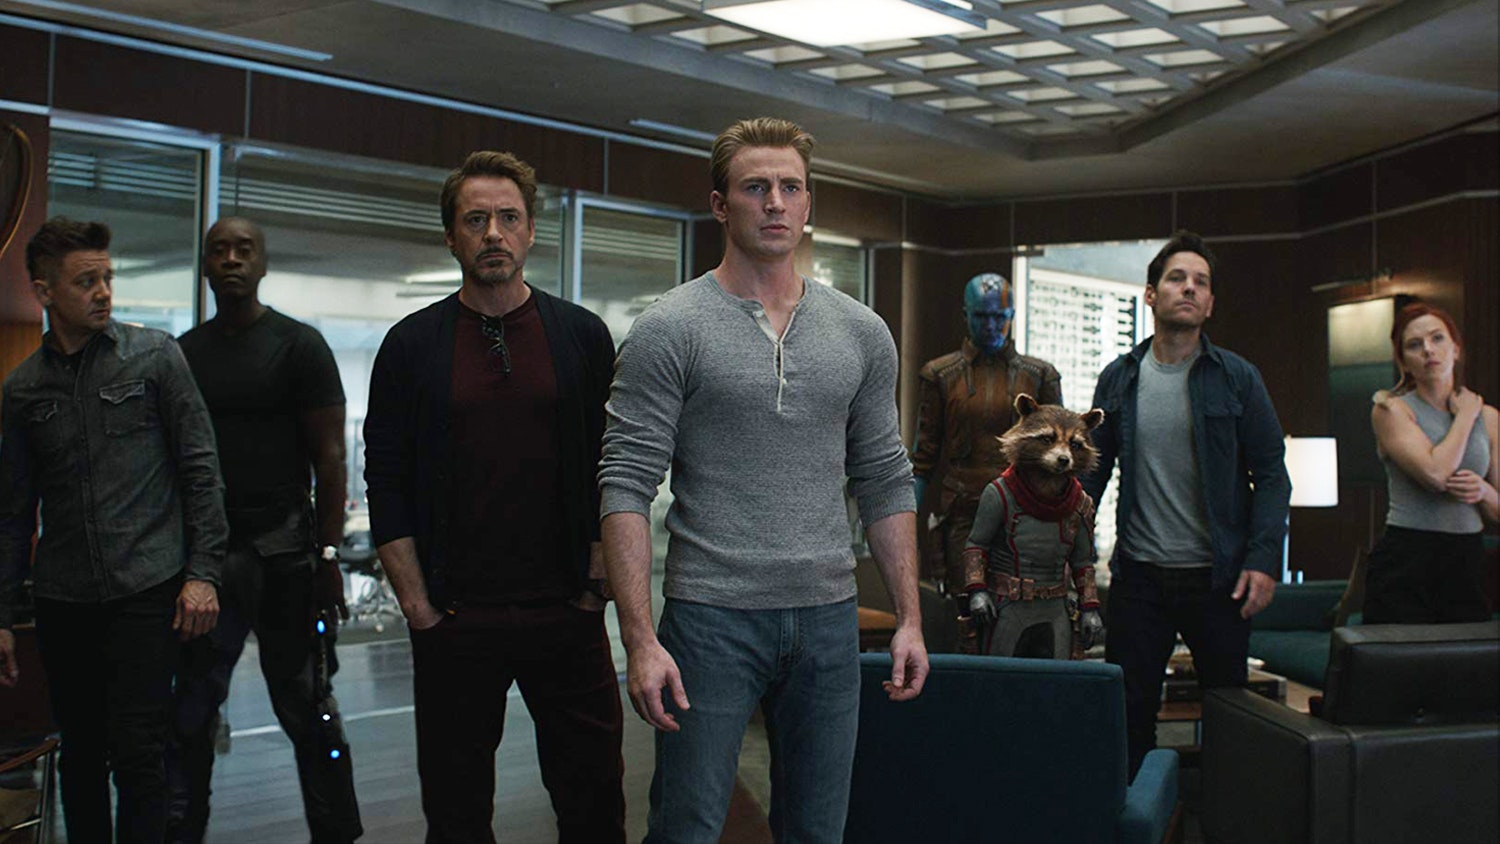 Avengers: Endgame' Is Marvel's Version Of The 'Lost' Finale